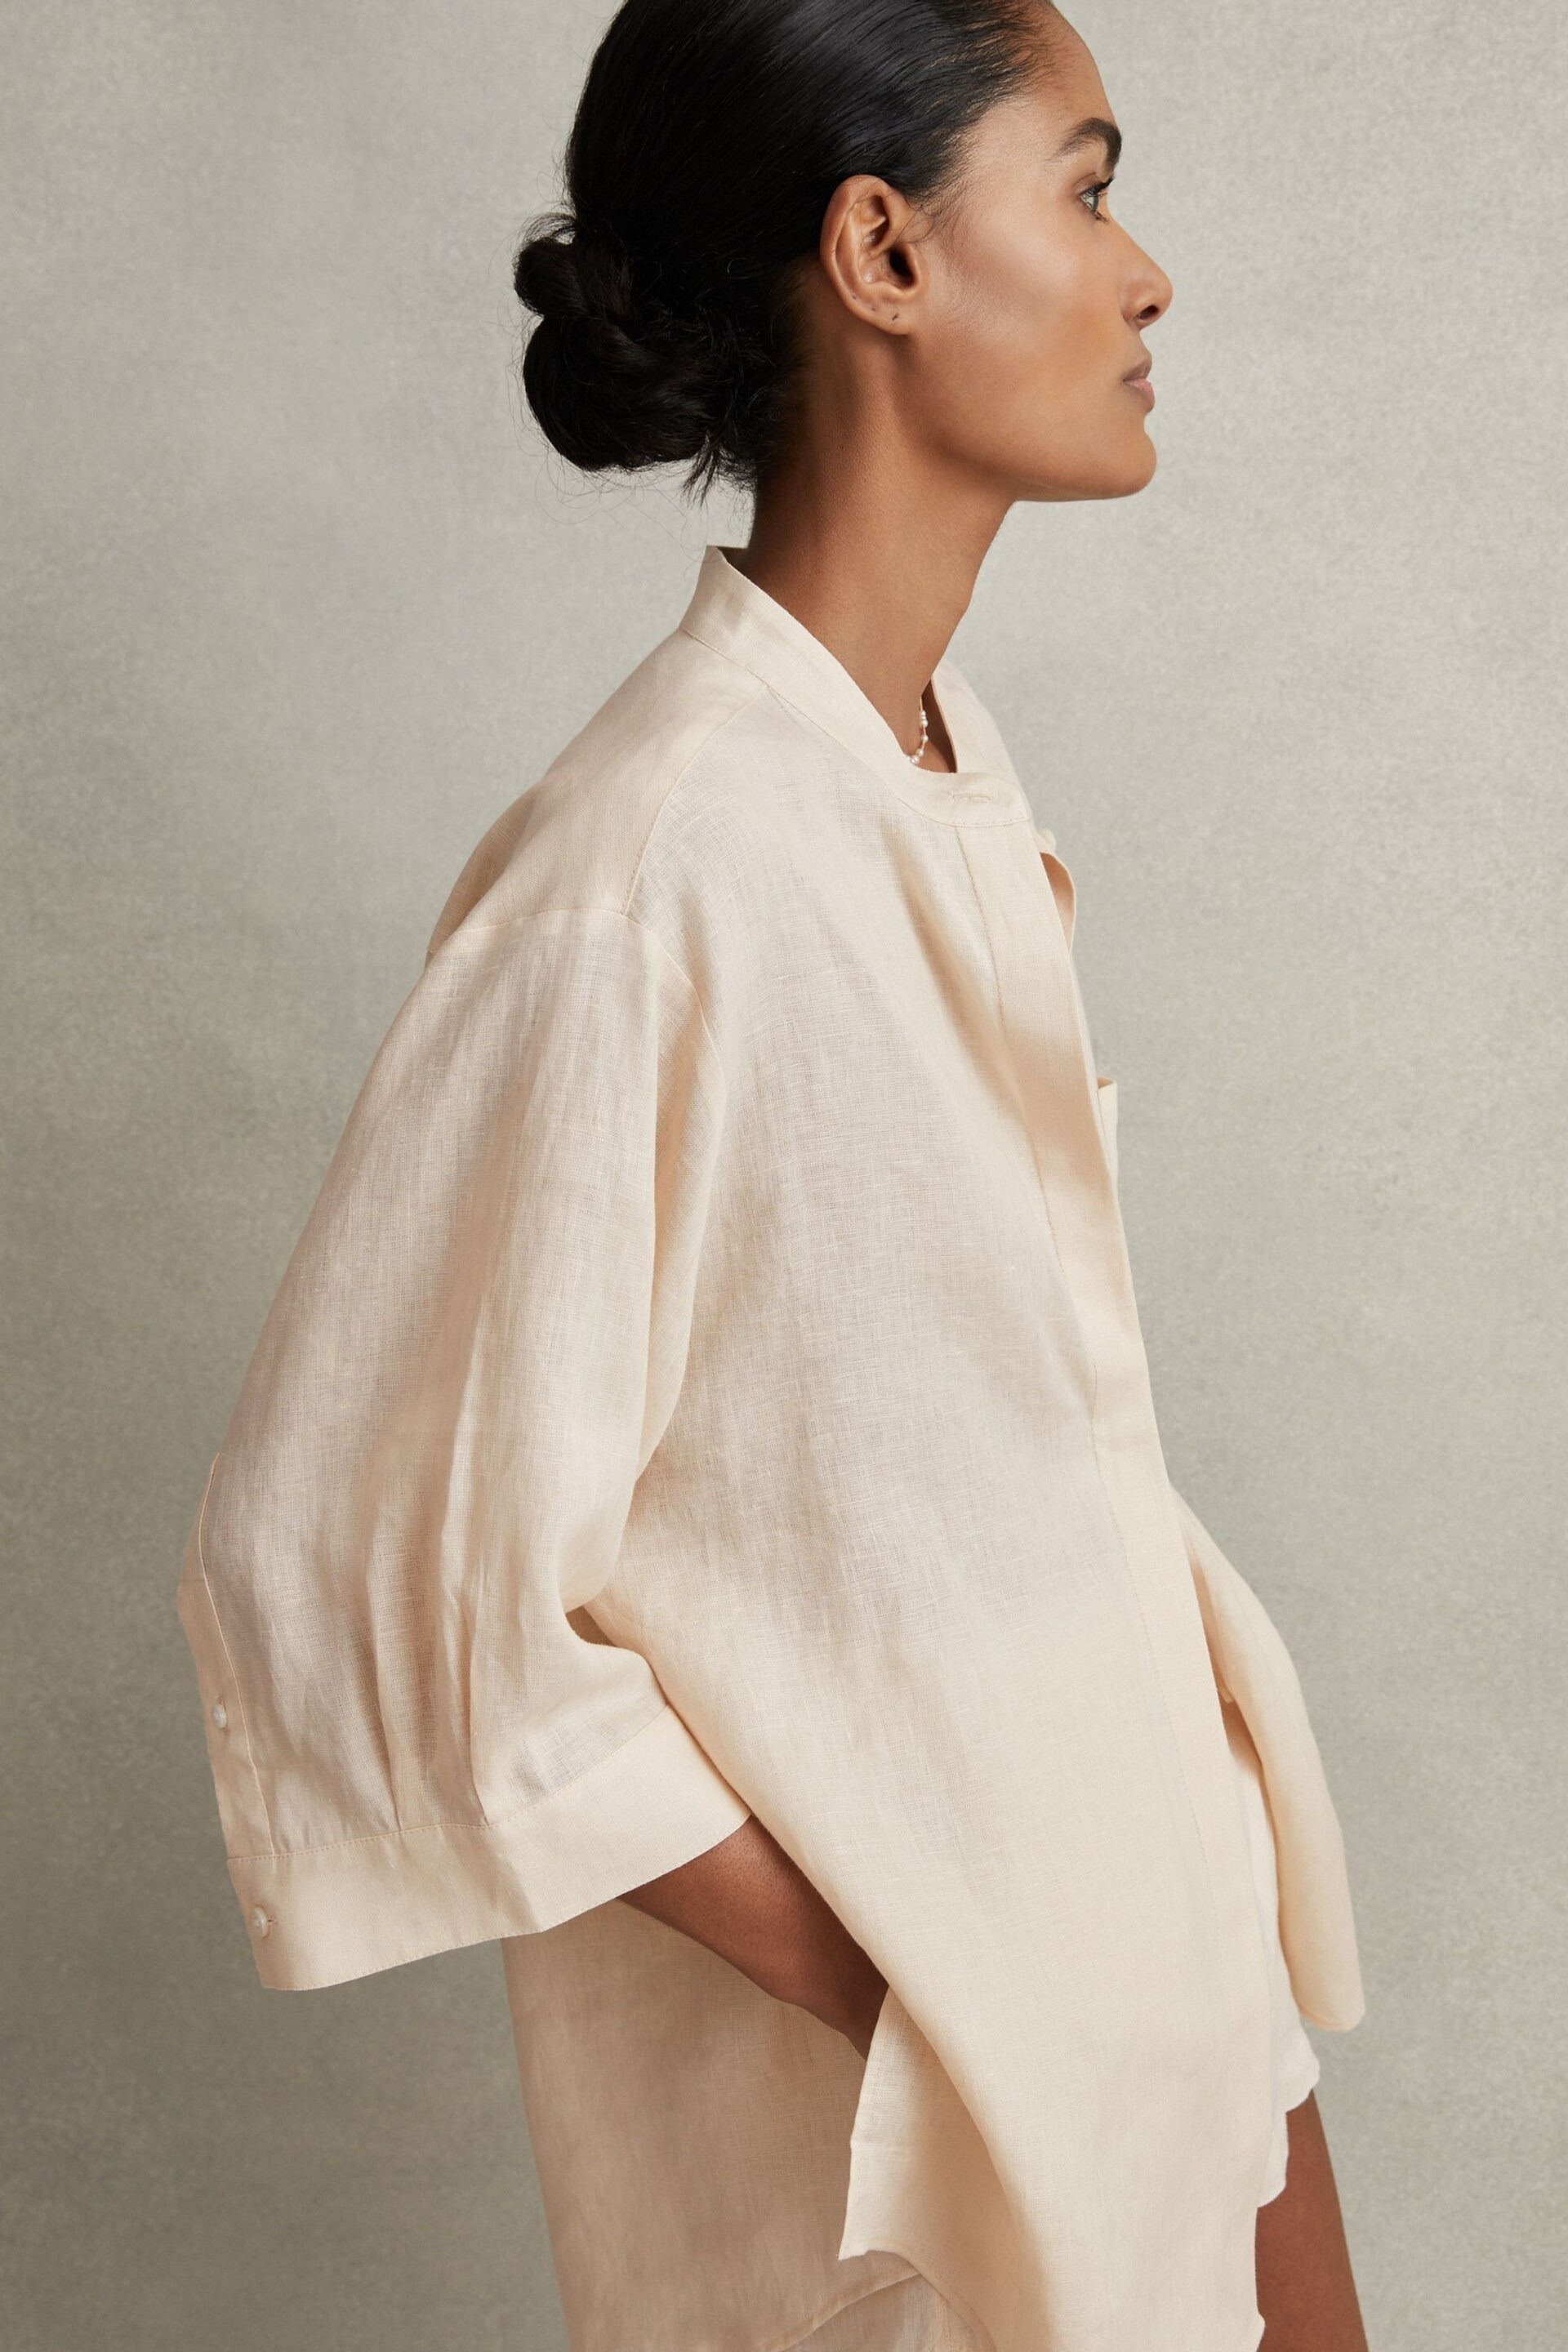 Reiss Blush Winona Relaxed Sleeve Linen Shirt - Image 5 of 6